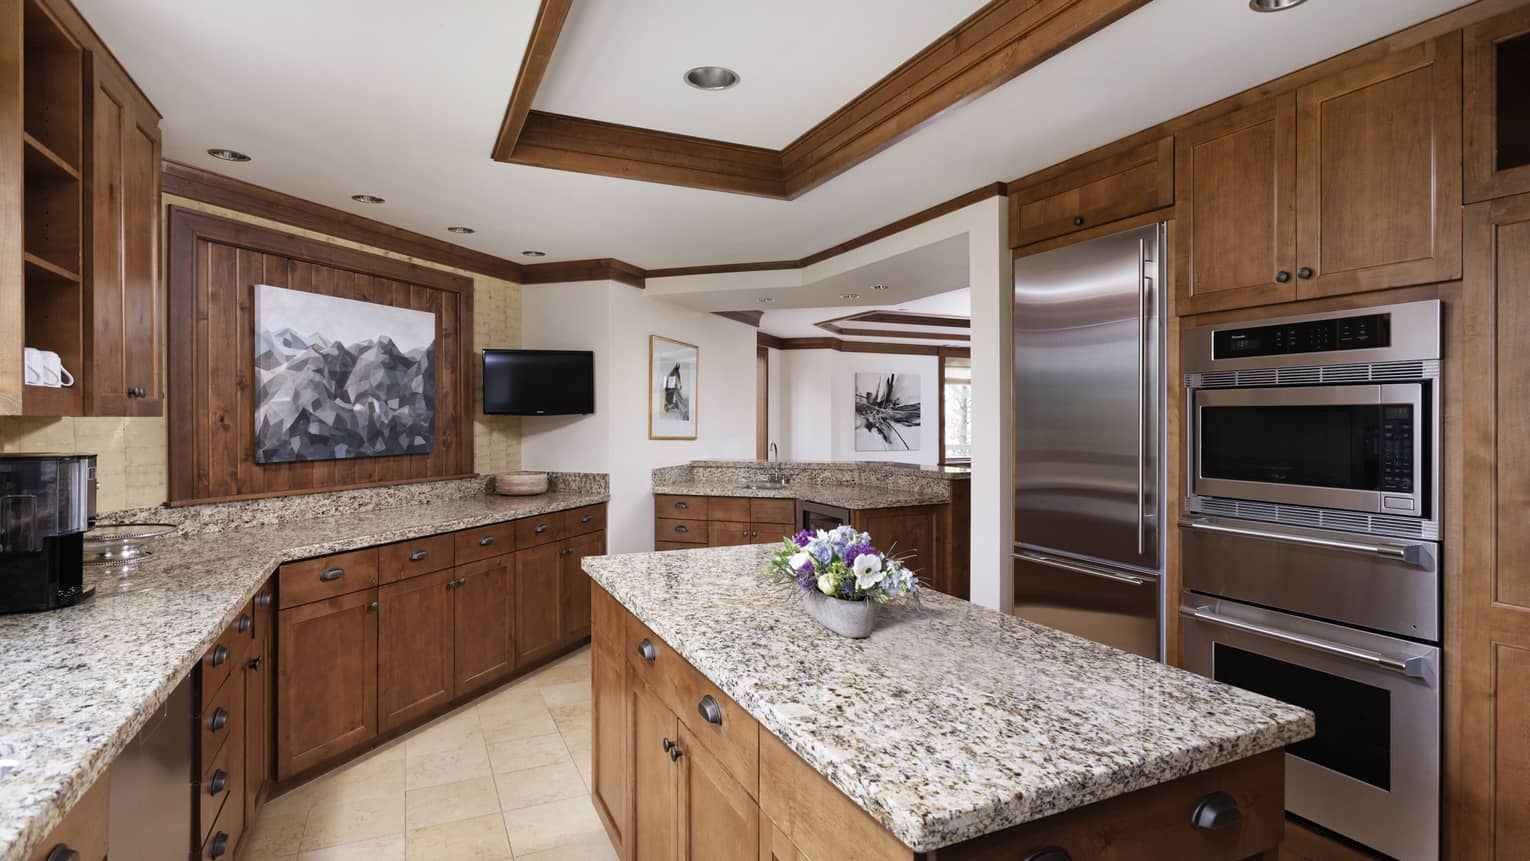 Kitchen with granite countertops and wooden cabinetry and island